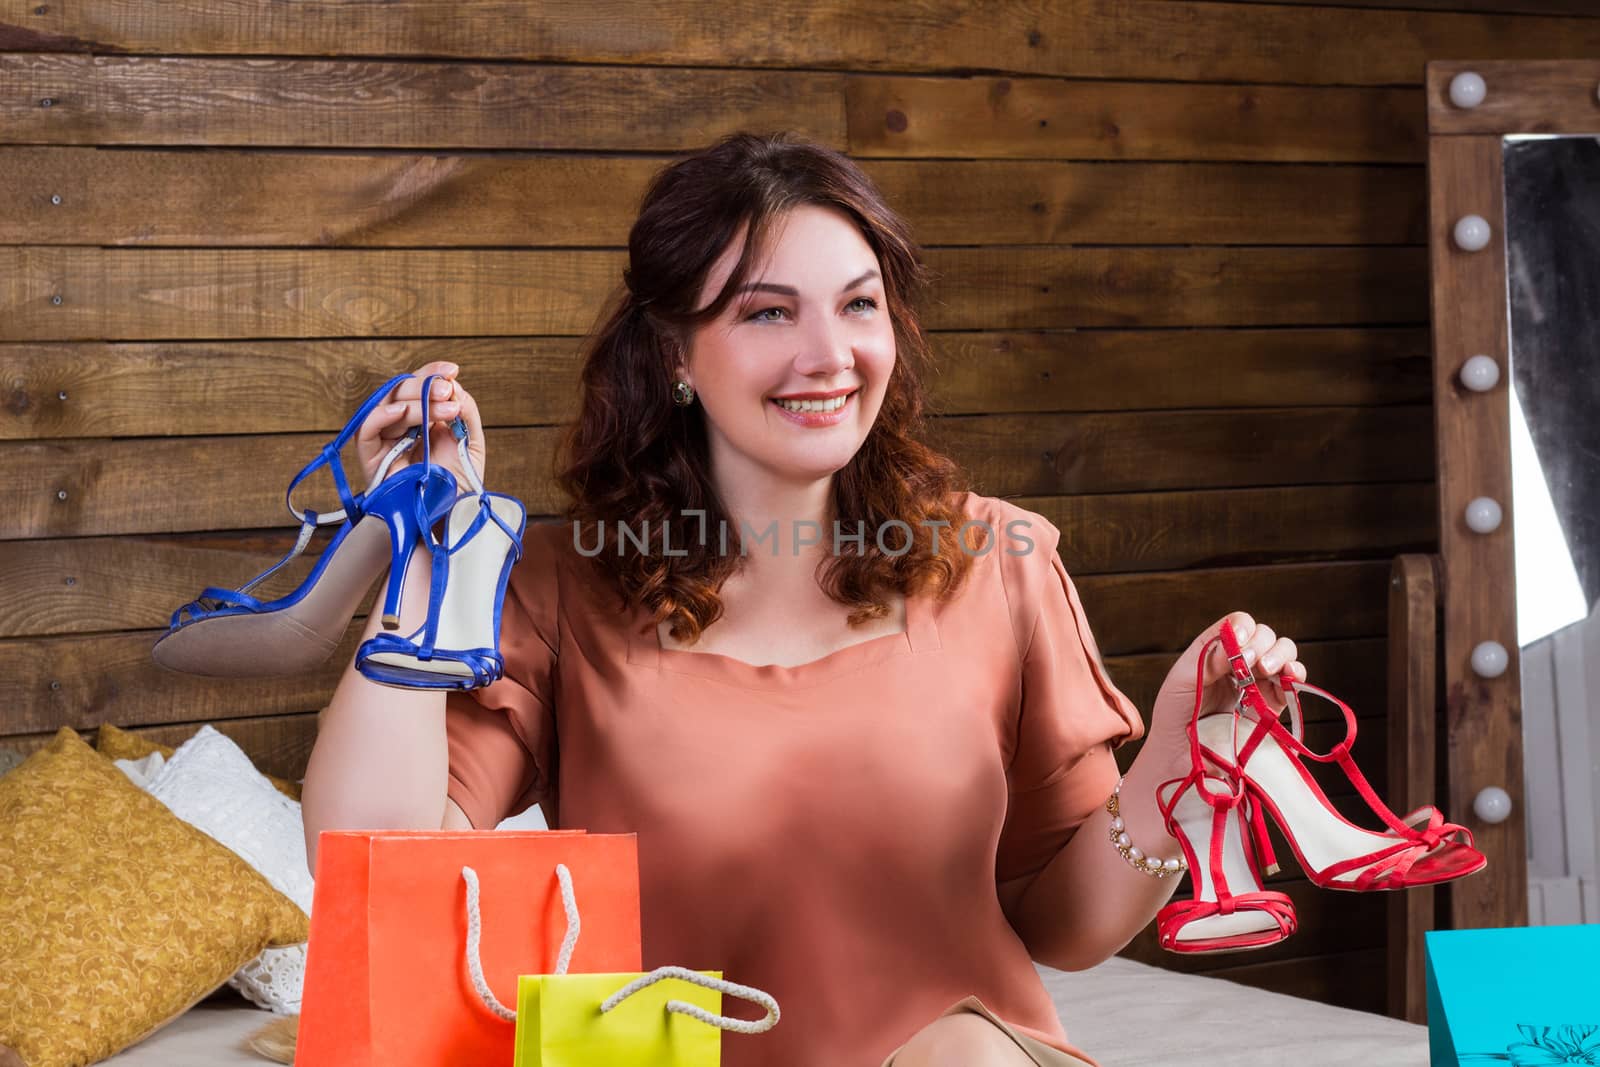 Happy smiling woman after shopping with colourful paper bags and new shoes sits on bed with wooden wall on background